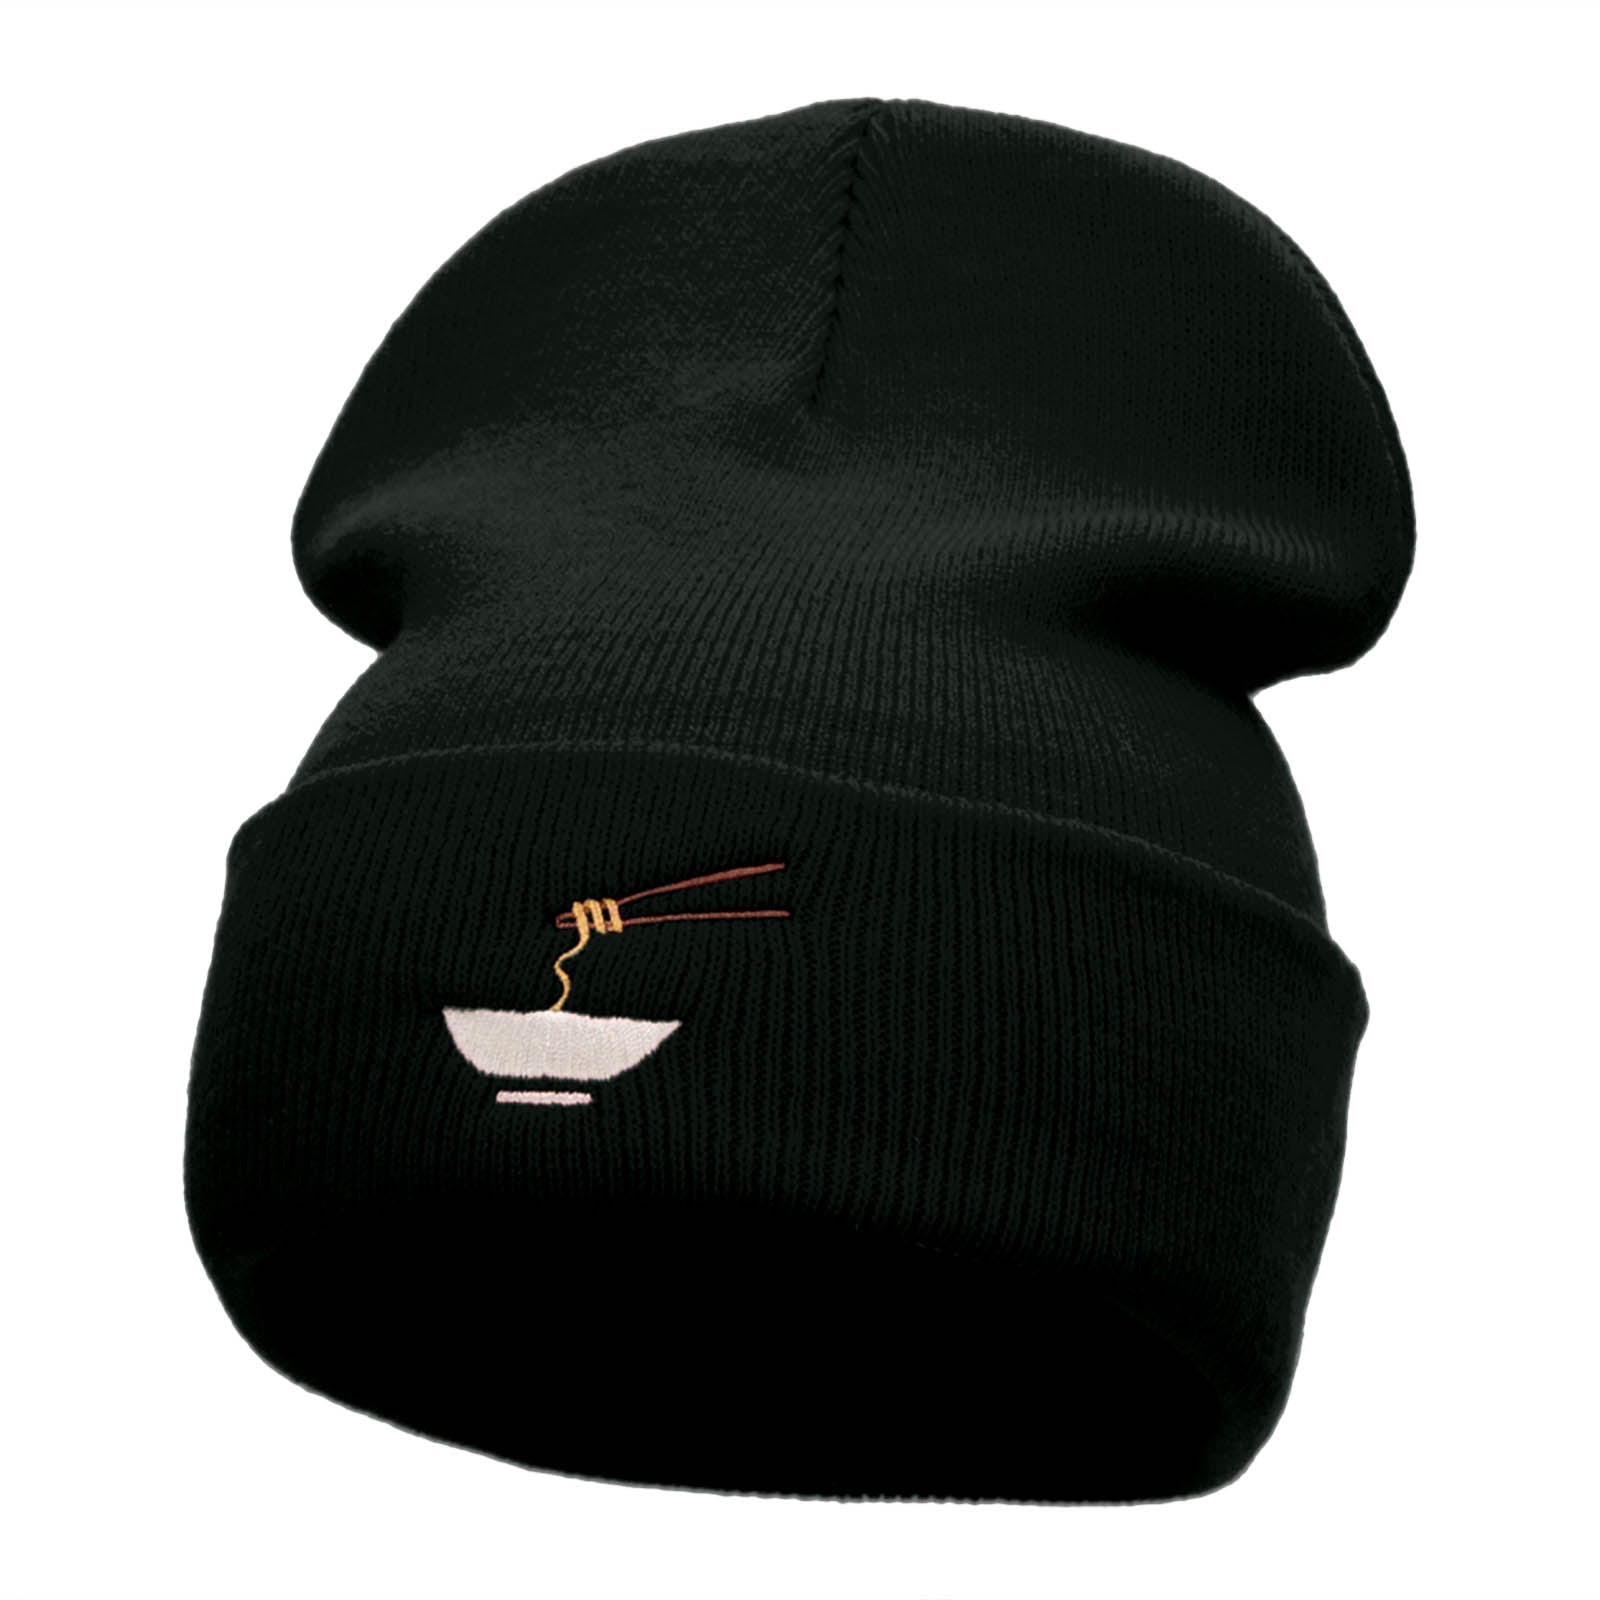 Noodle Bowl Embroidered 12 Inch Long Knitted Beanie - Black OSFM